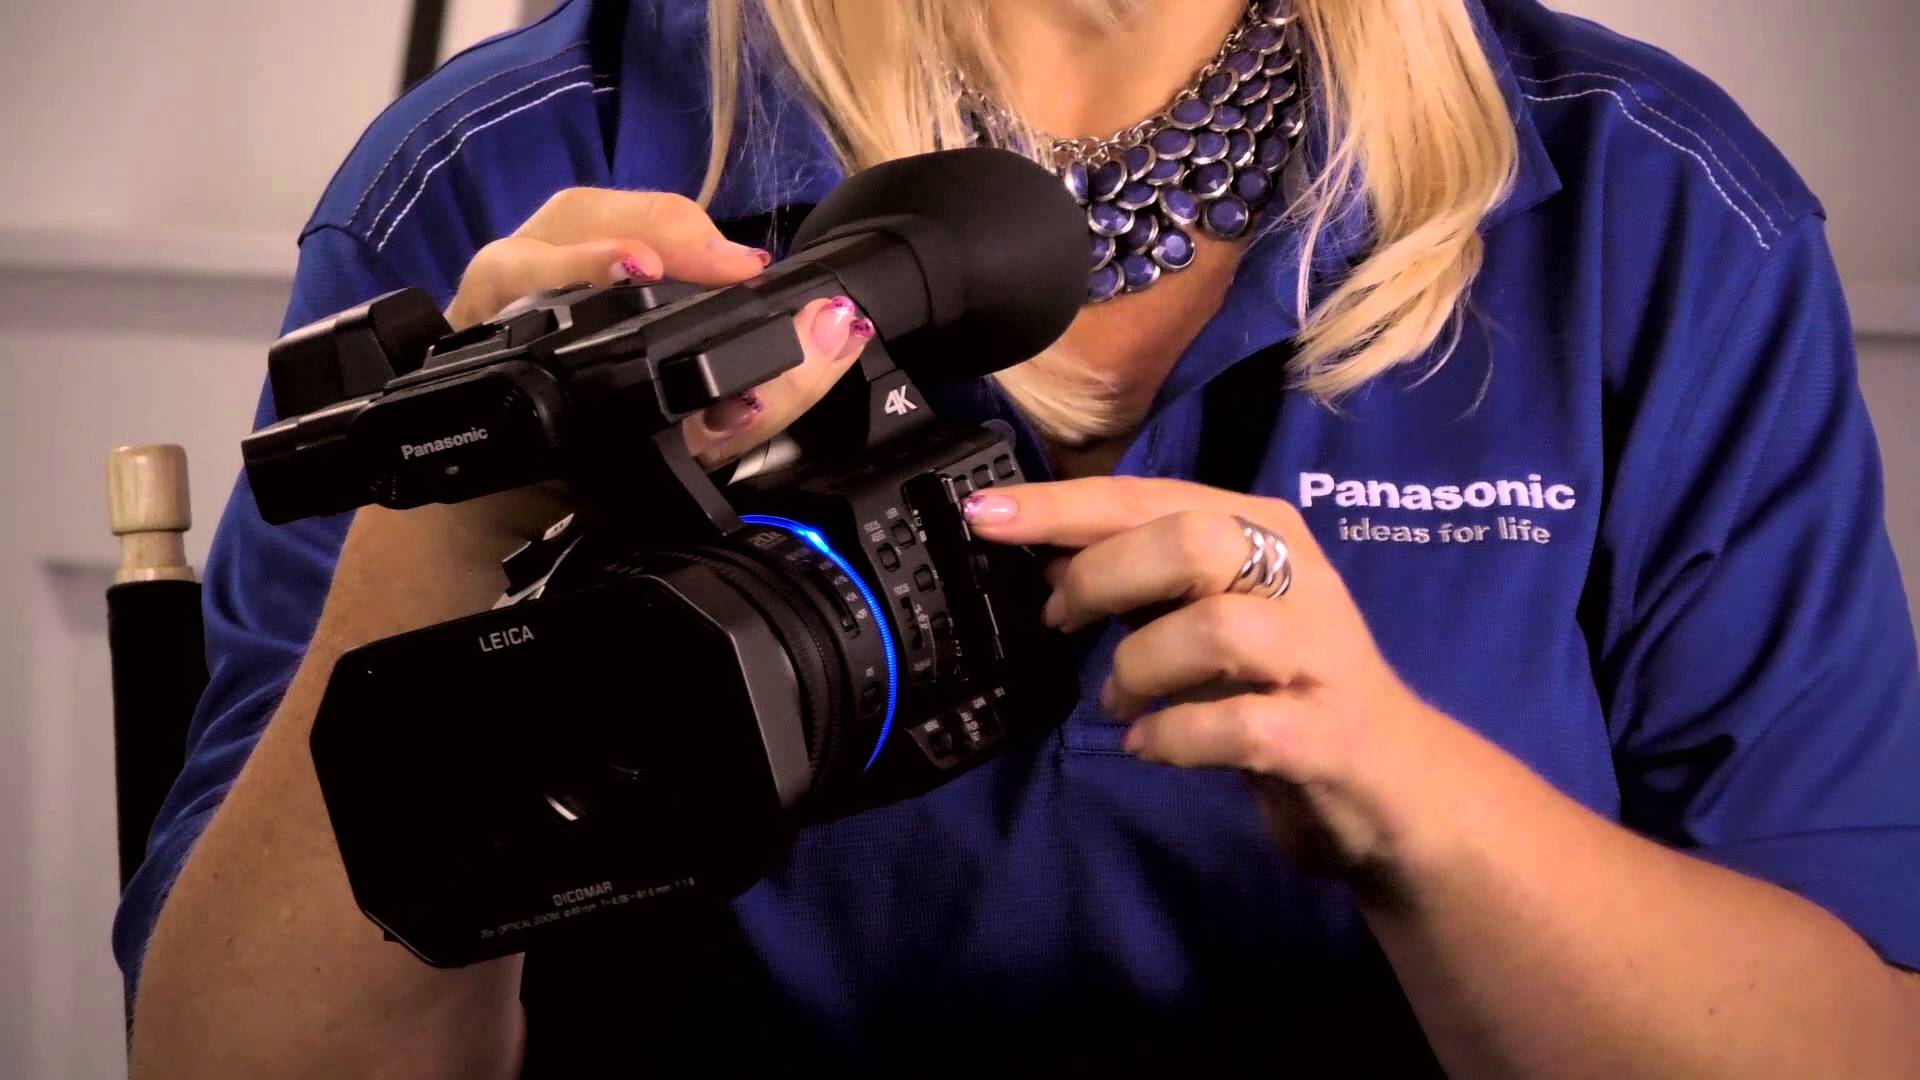 Panasonic HCX1000 – A product Overview